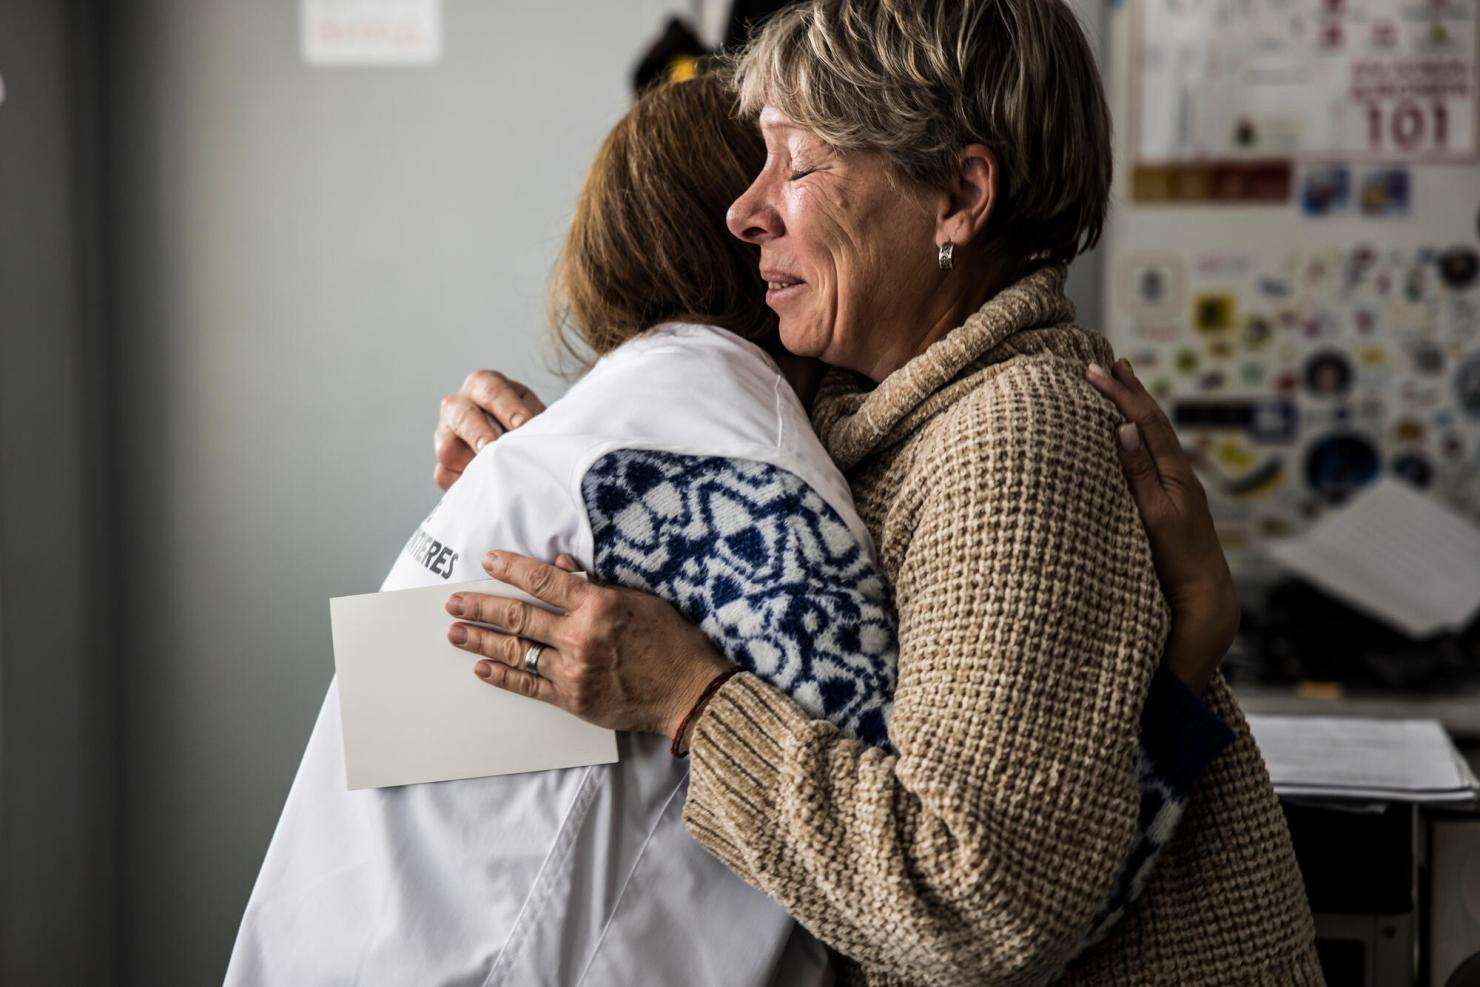 Health workers on Ukraine’s front lines receive emotional support from Doctors Without Borders